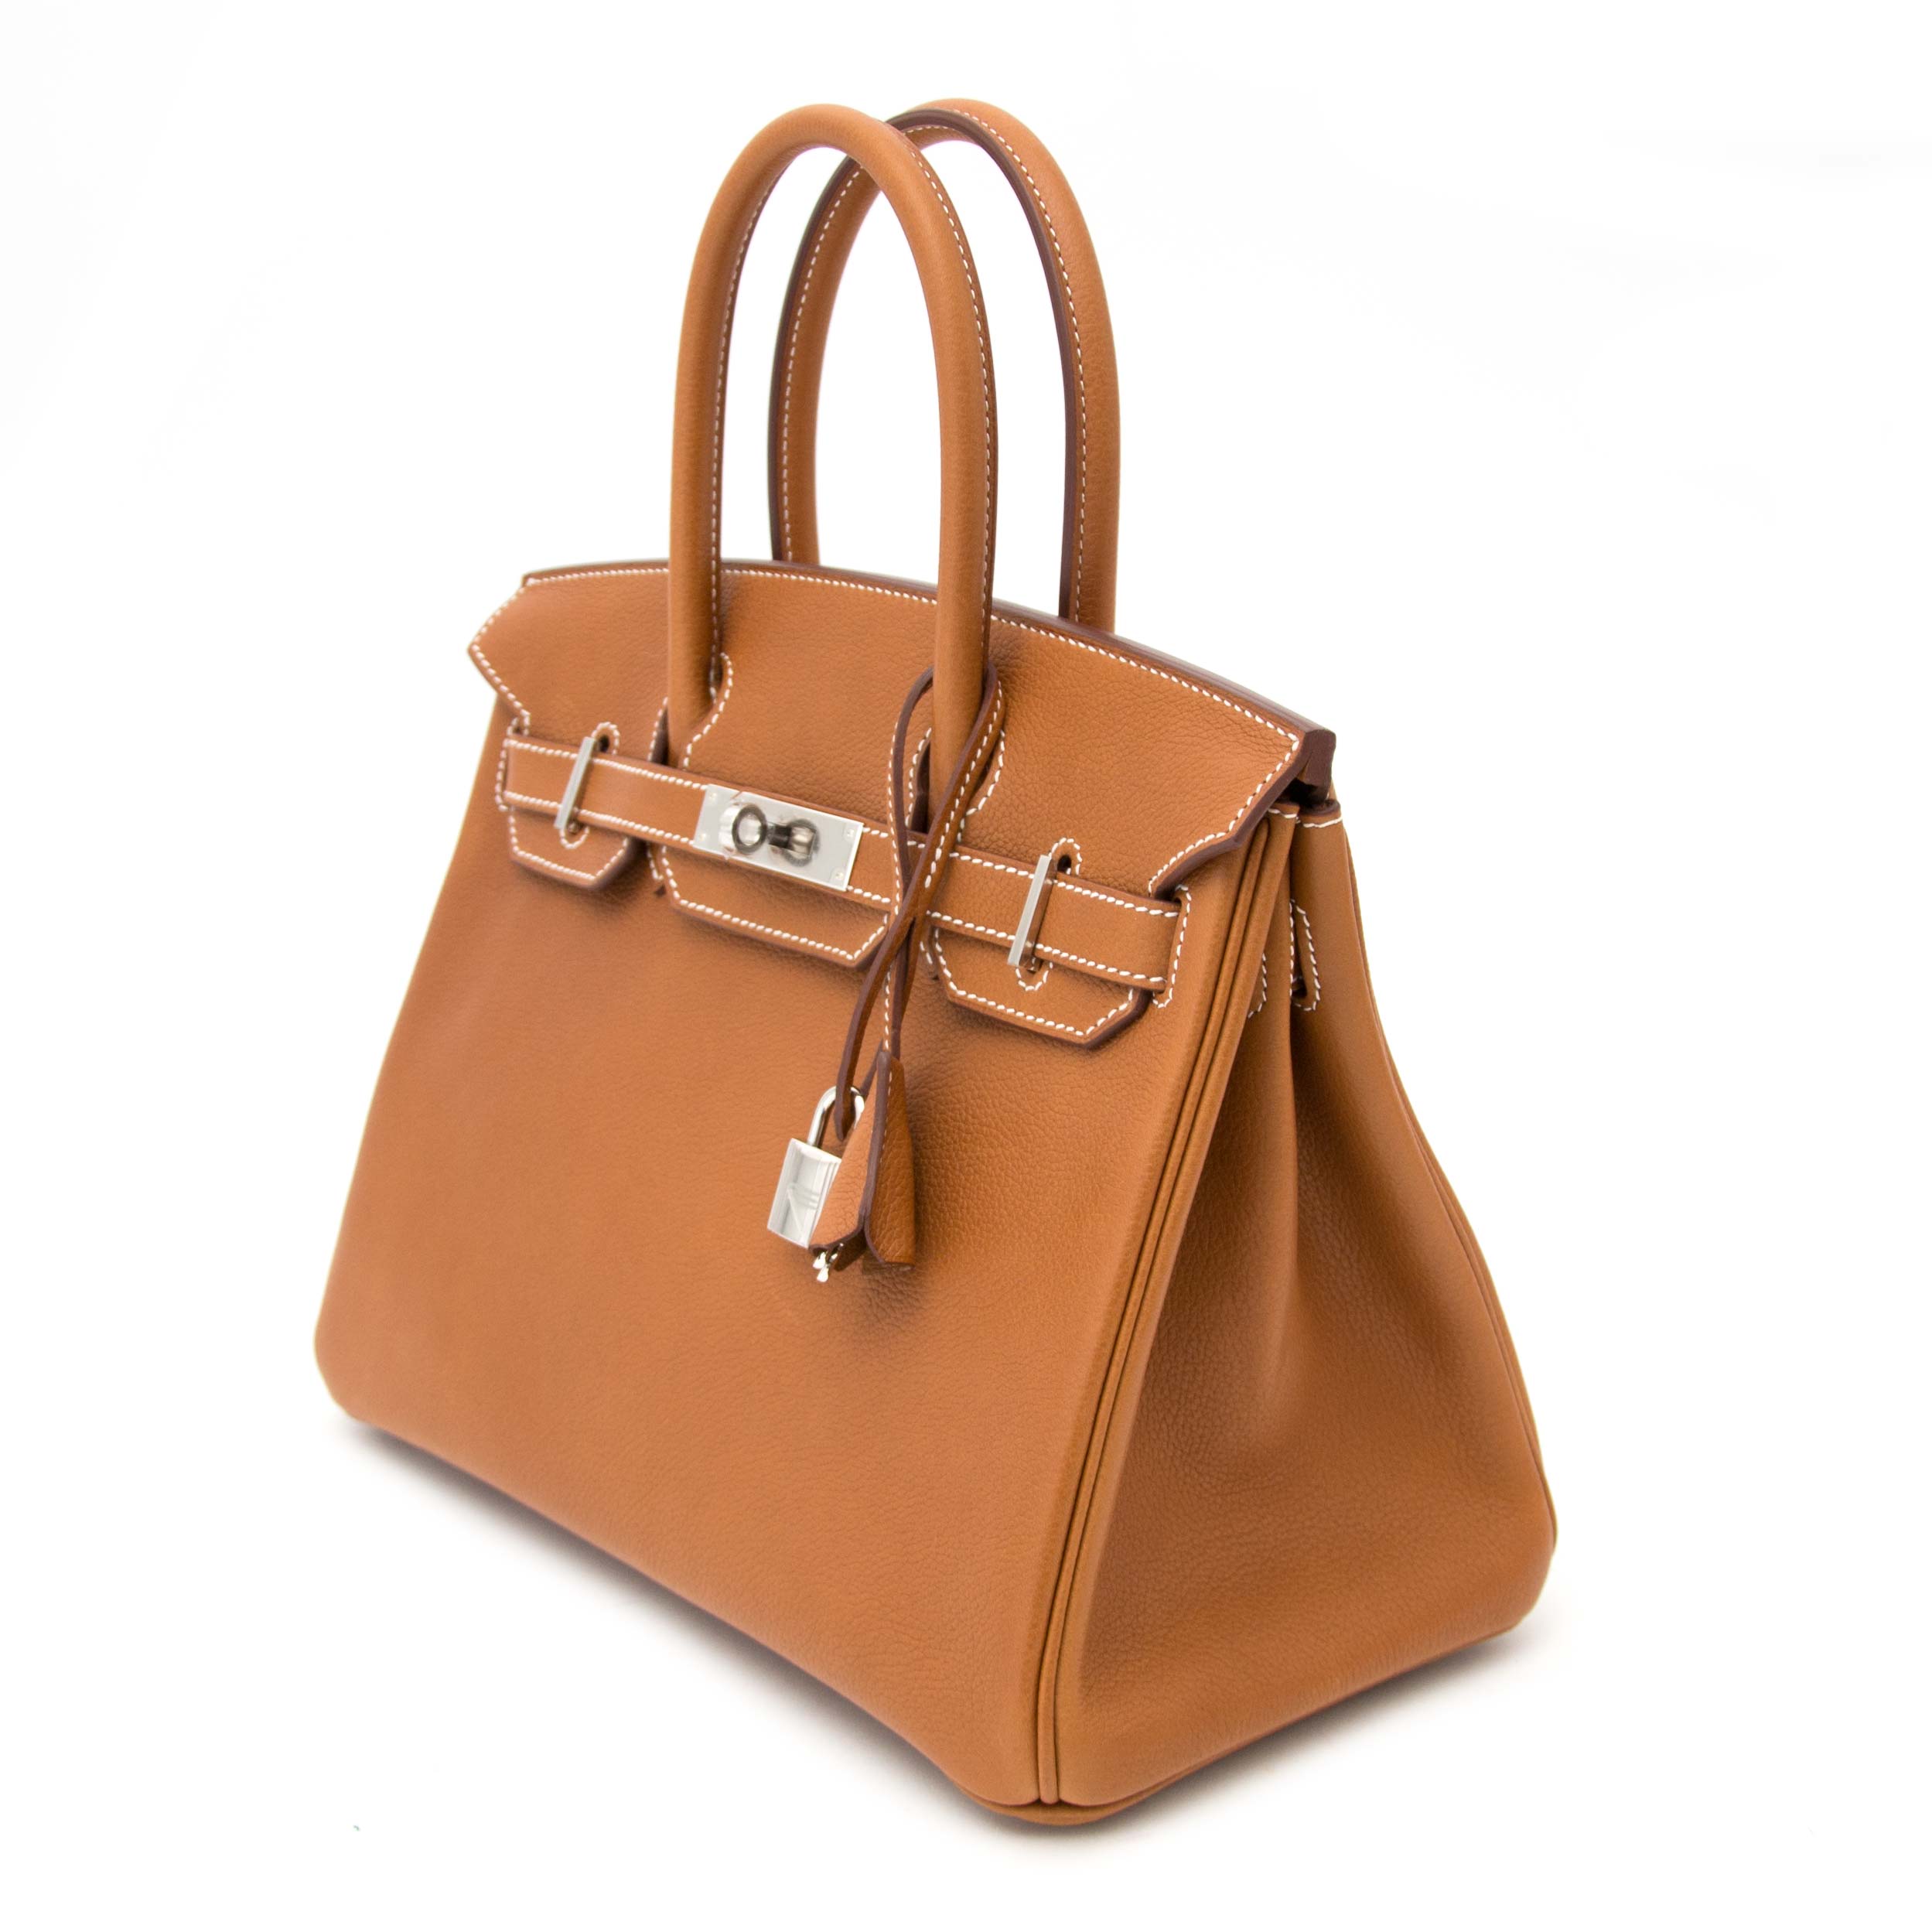 Hermès Fauve Barenia Faubourg Birkin 30 Silver Hardware, 2020 Available For  Immediate Sale At Sotheby's